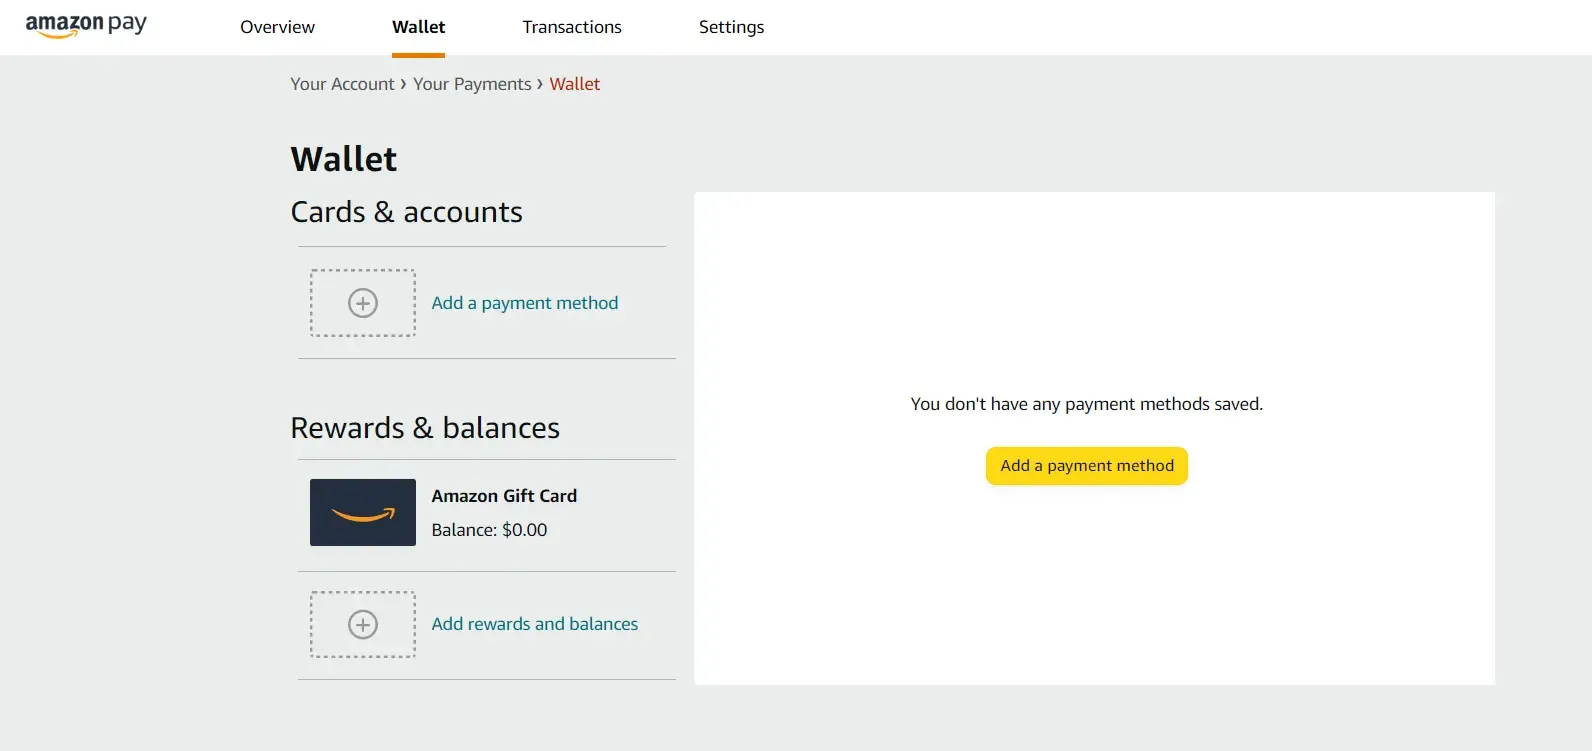 How to Check and Manage Visa Gift Card Balance on